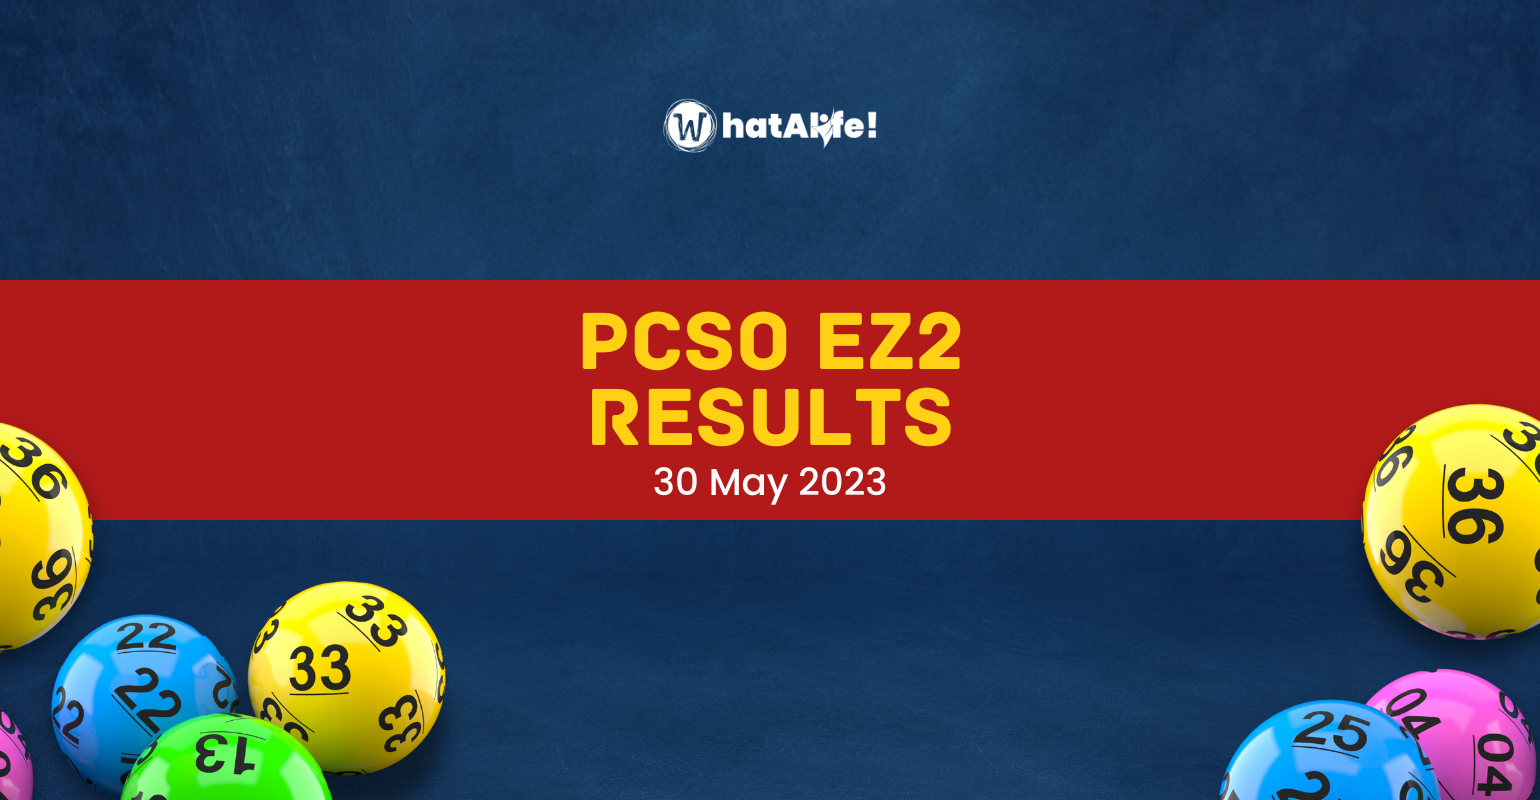 EZ2 2D RESULTS May 30, 2023 (Tuesday)